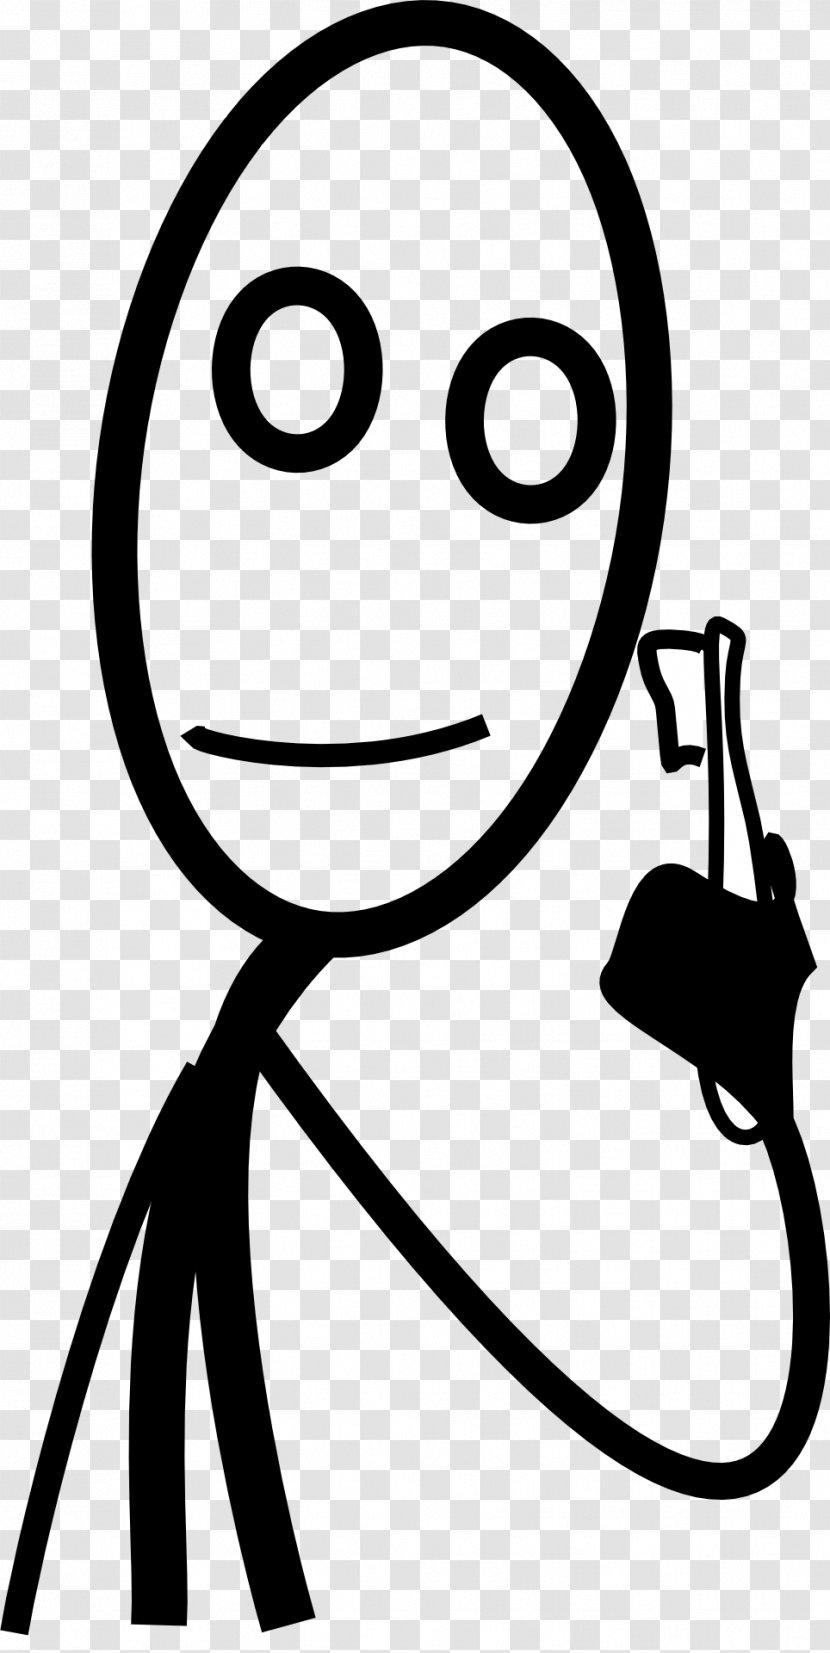 Stick Figure Tooth Brushing Toothbrush Clip Art - Facial Expression - Figures Transparent PNG